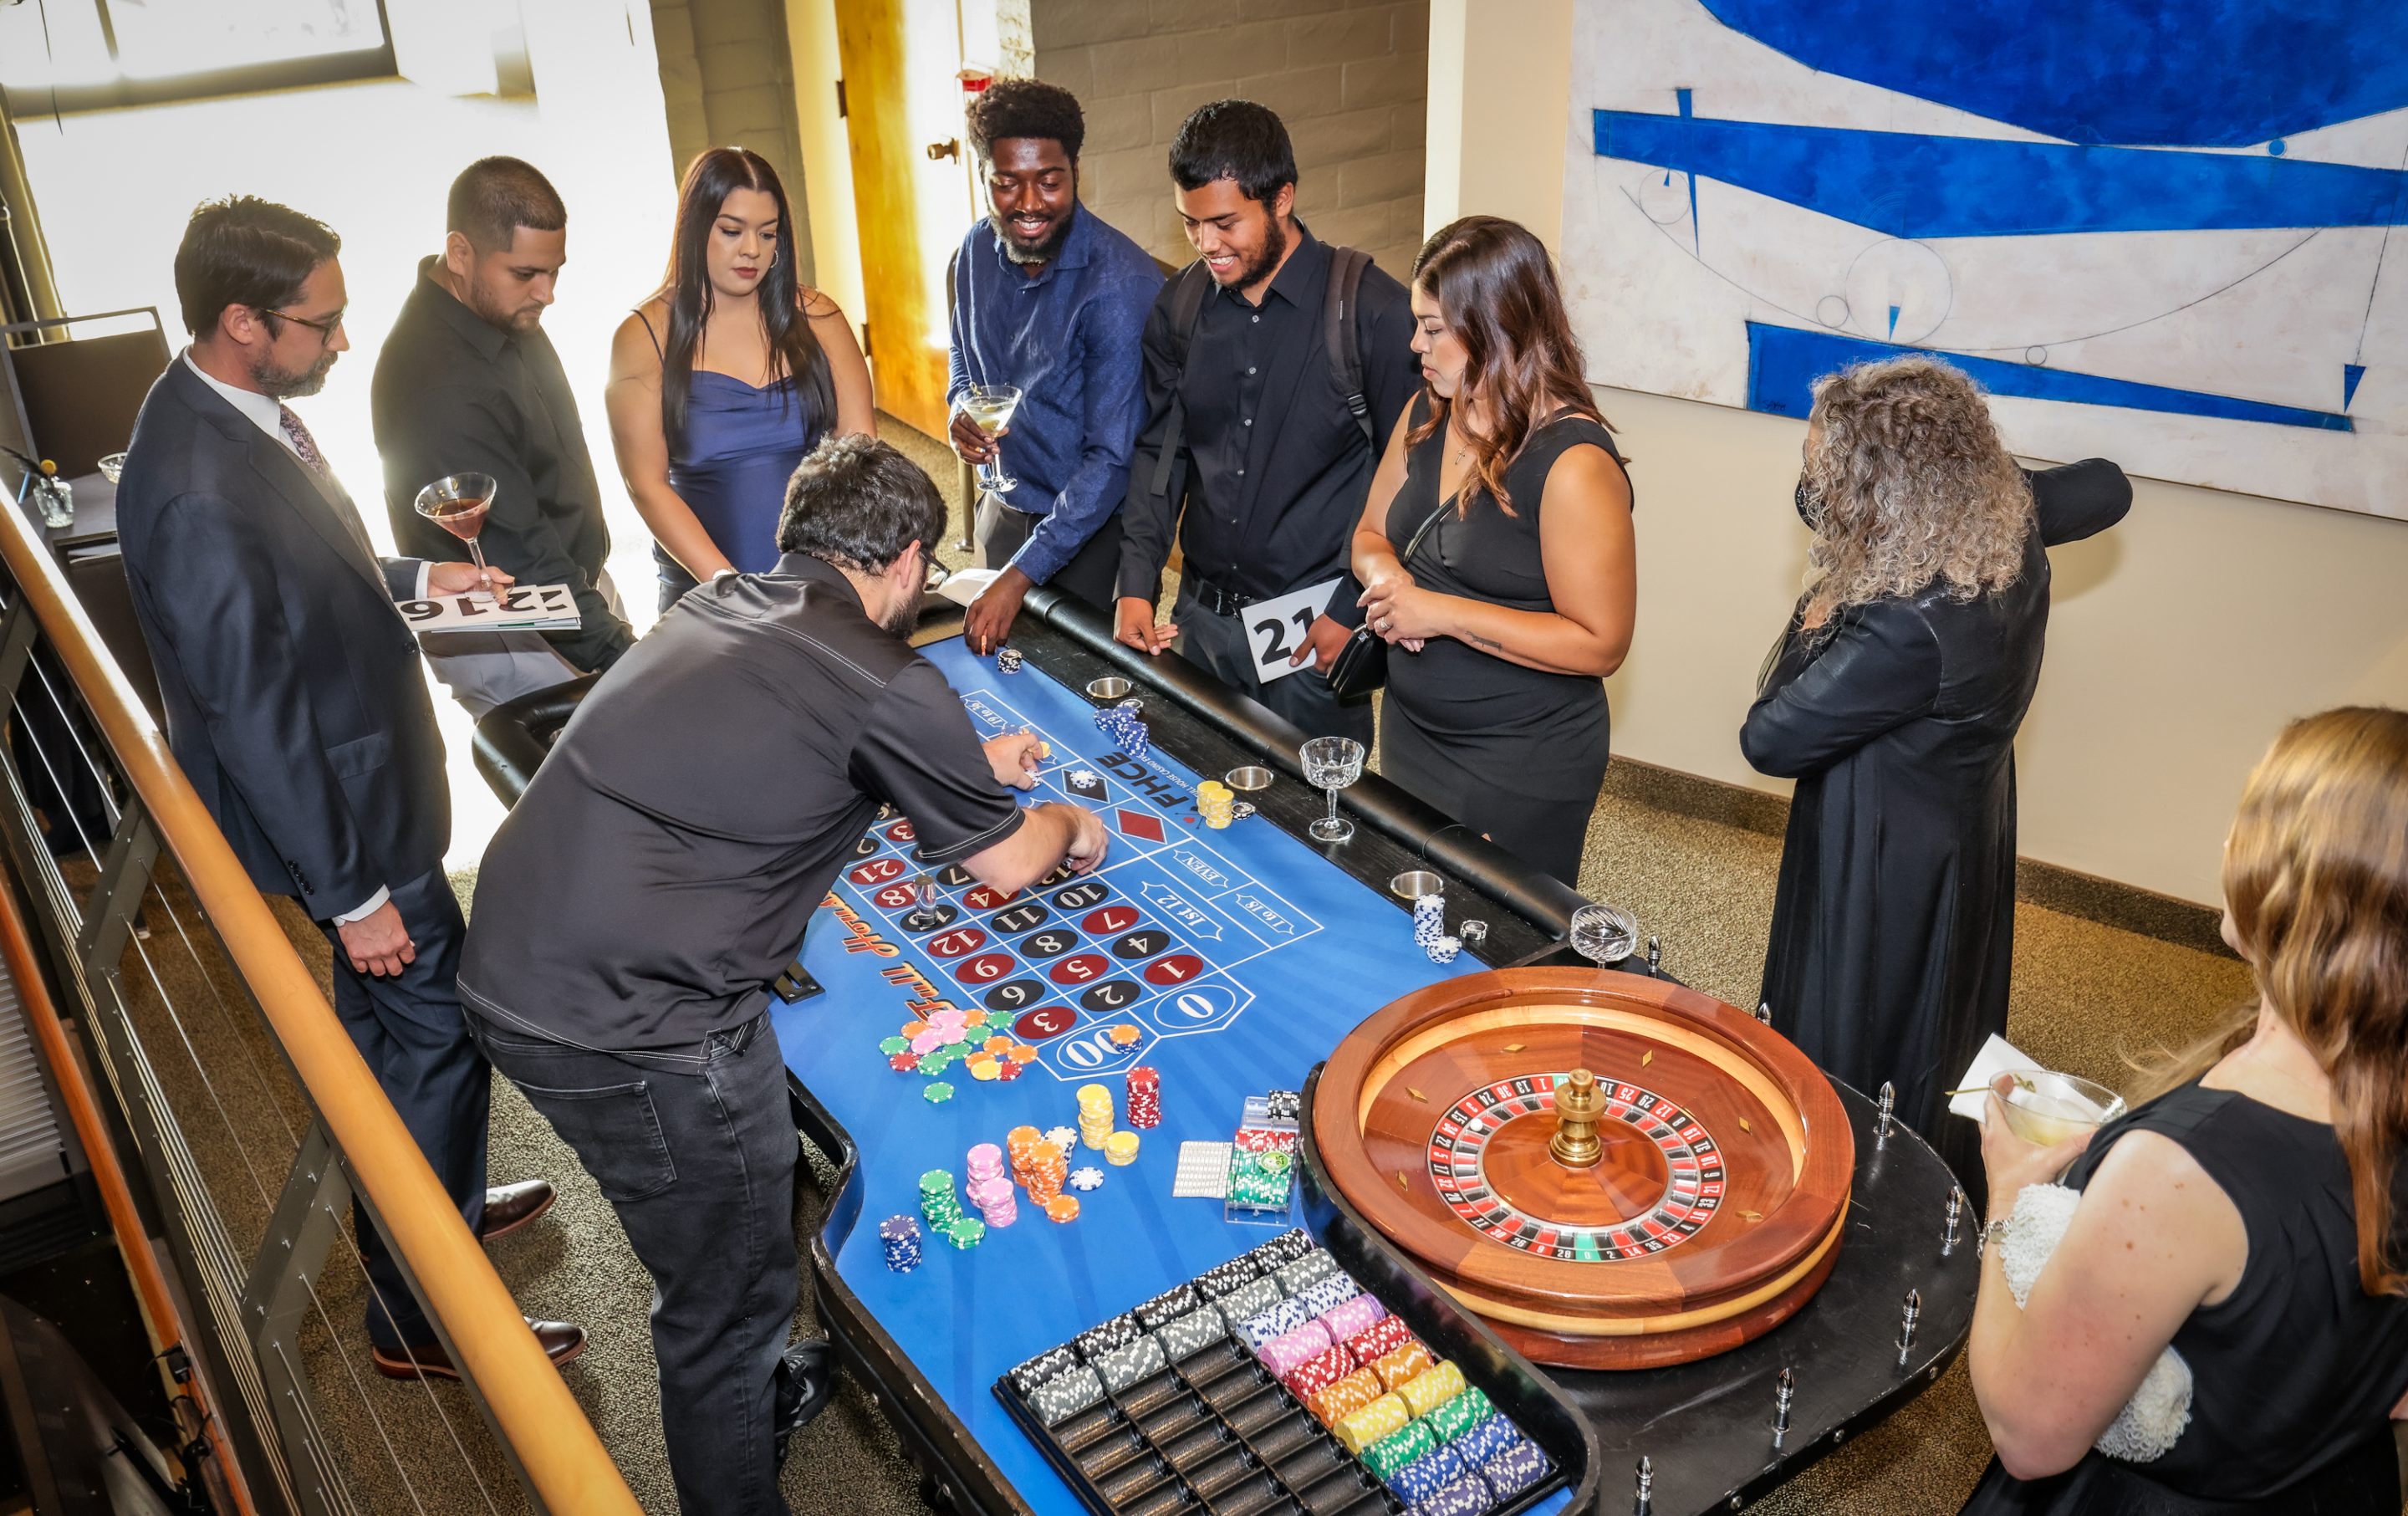 A group of people playing roulette at a casino in Santa Rosa.